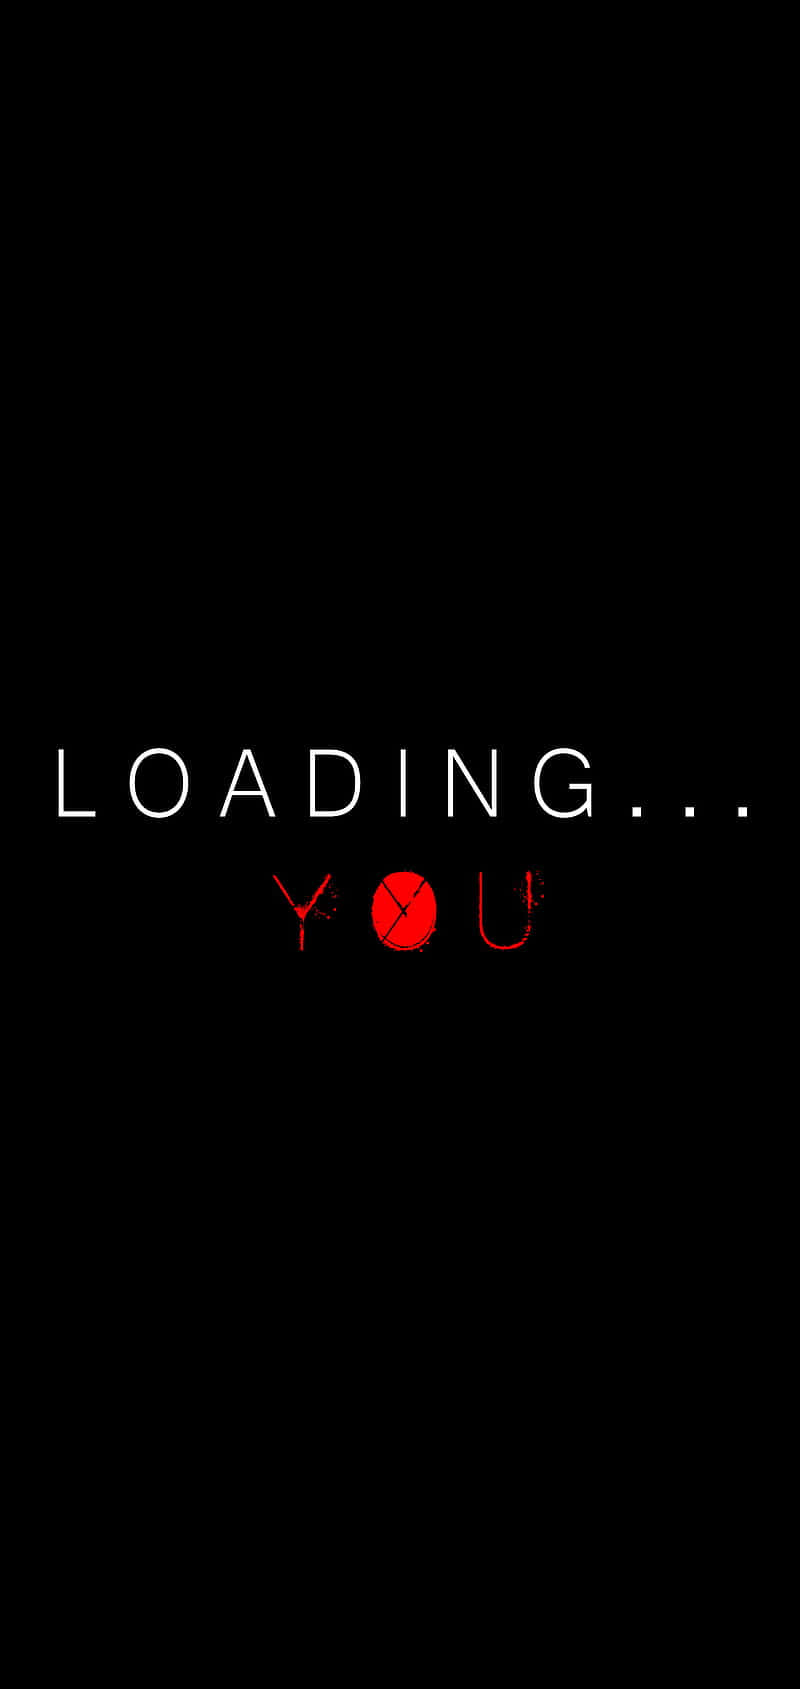 Loading You - A Black Background With Red Letters Wallpaper